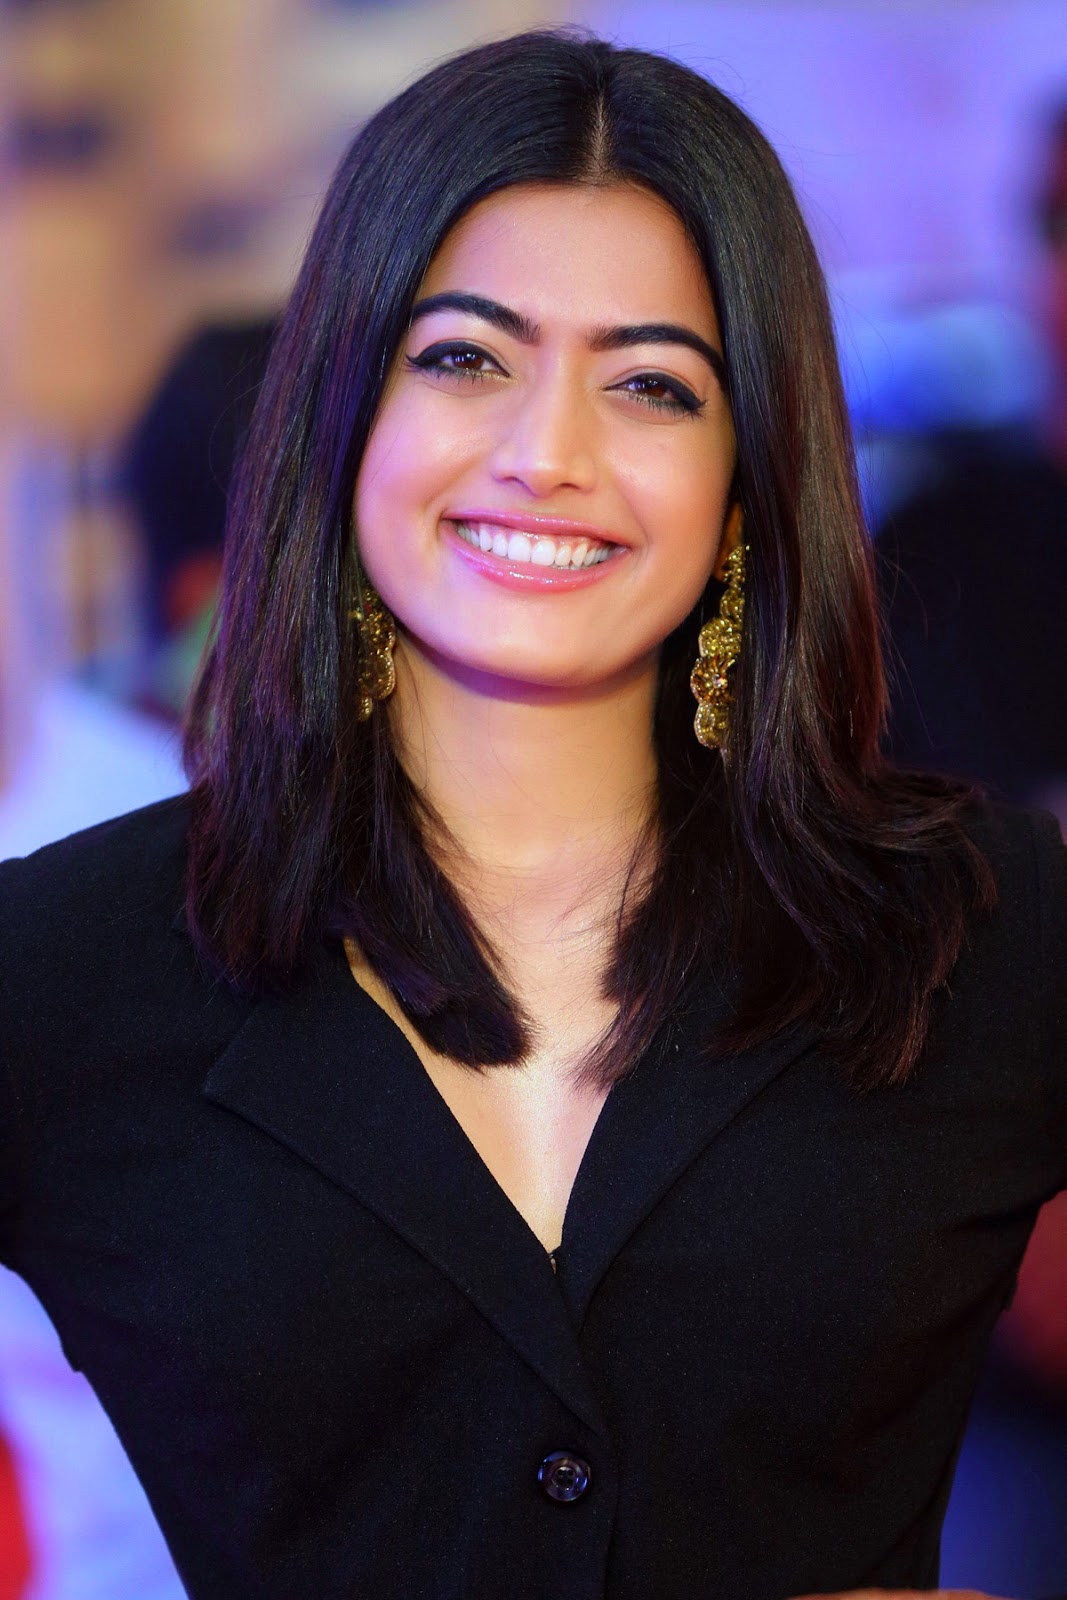 Rashmika Mandanna Hd Wallpapers And Images 40 We hope you enjoy our growing collection of hd images to use as a background or home please contact us if you want to publish a rashmika mandanna hd wallpaper on our site. rashmika mandanna hd wallpapers and